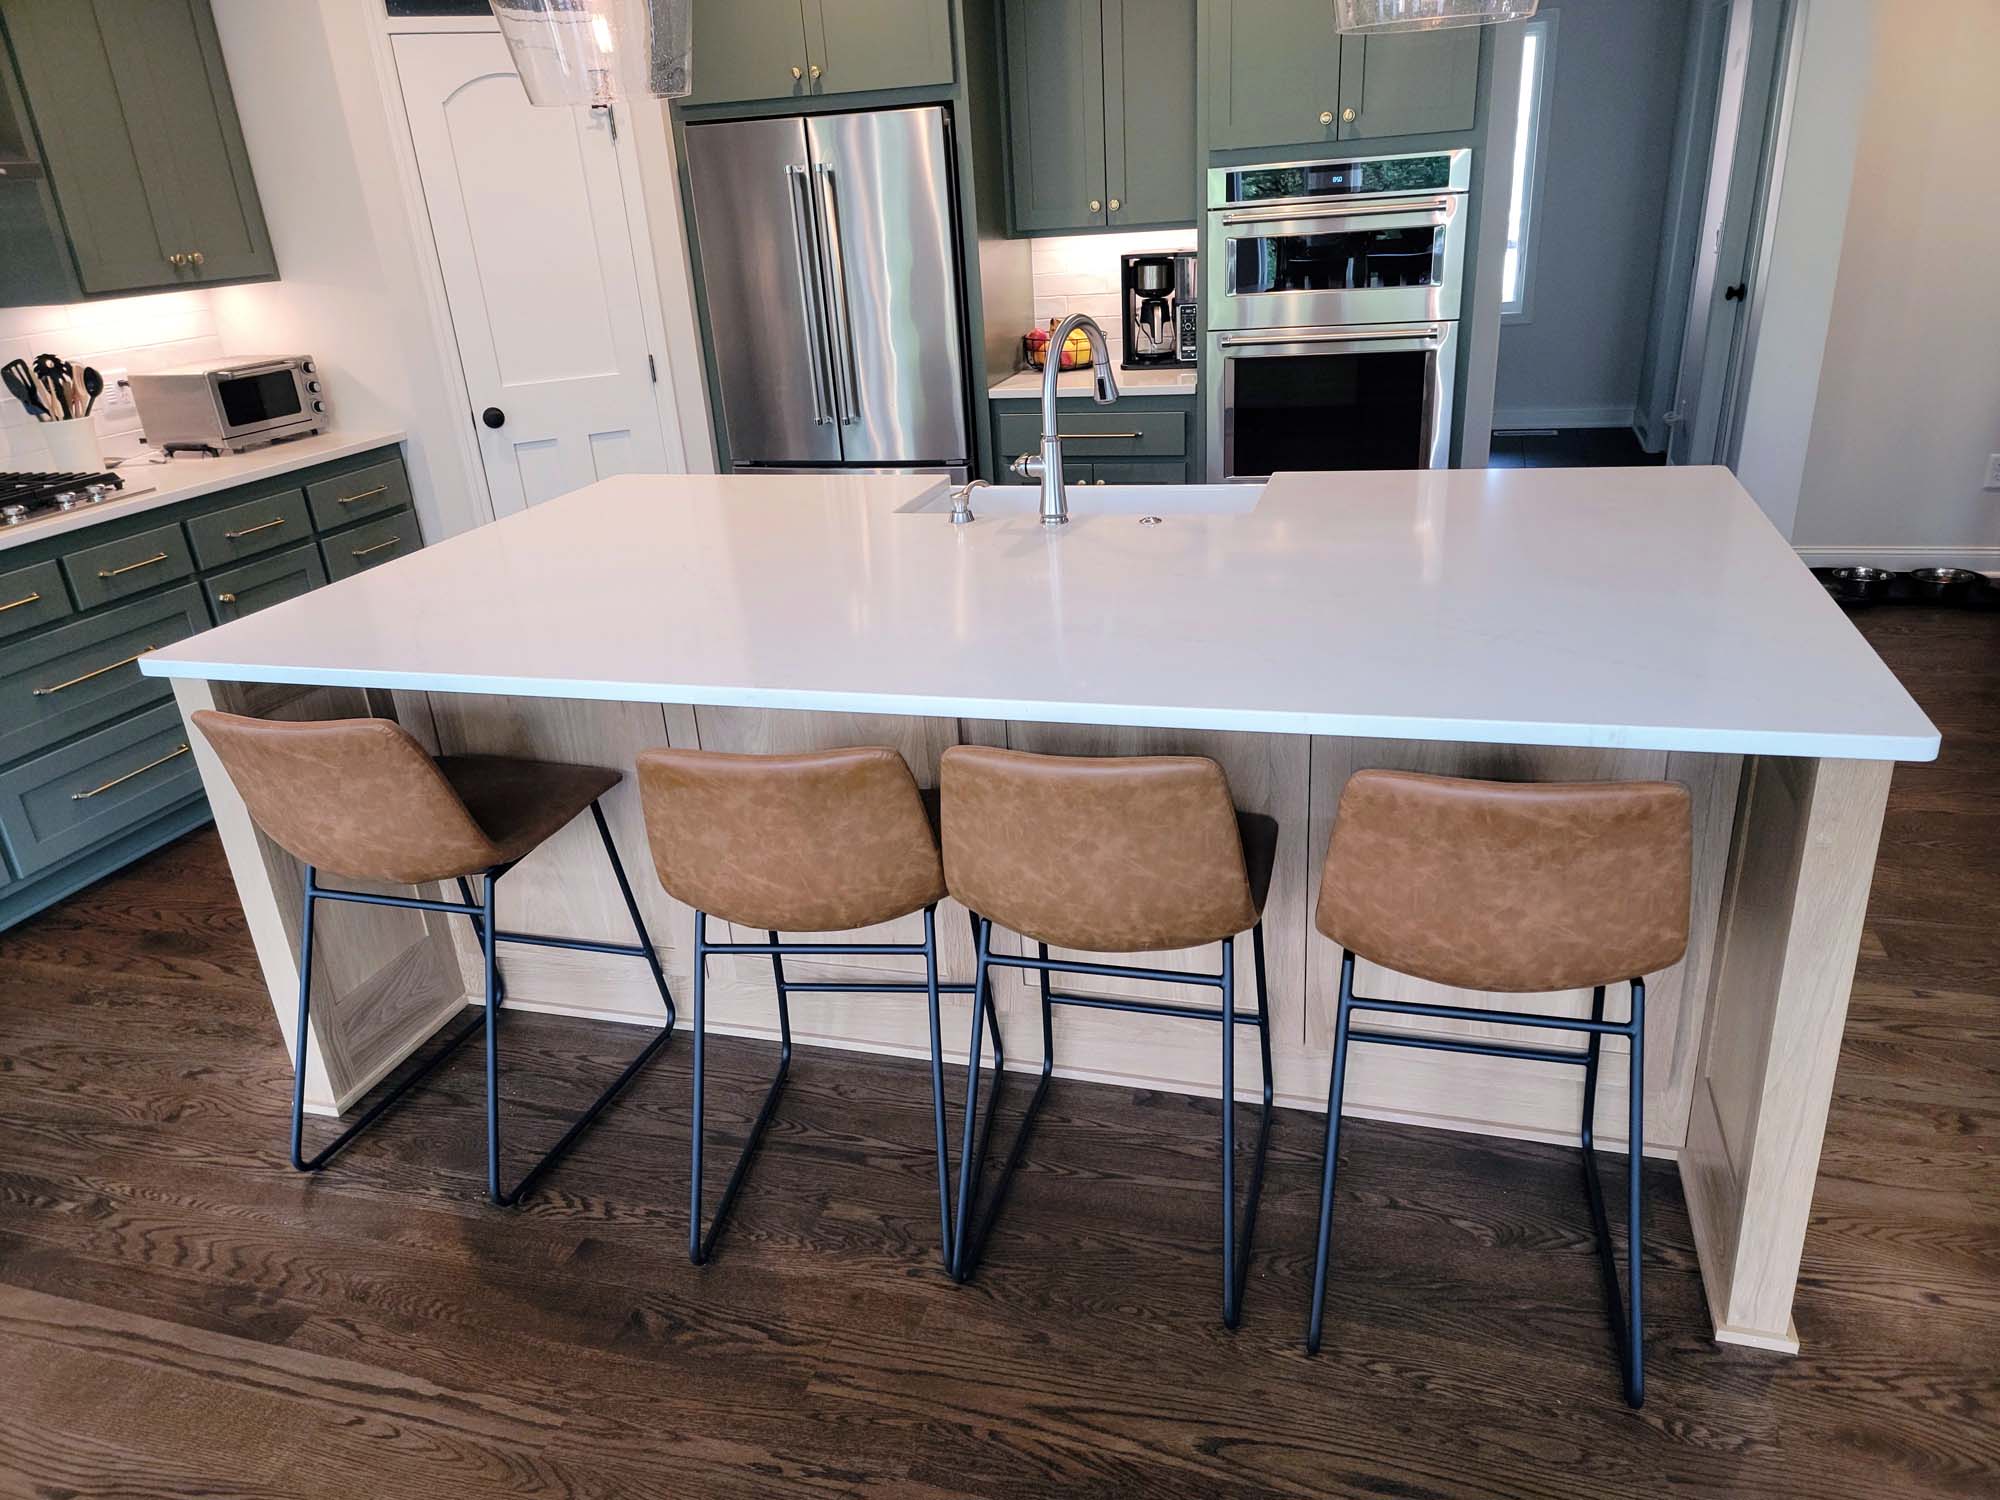 Kitchen island with seating for 4